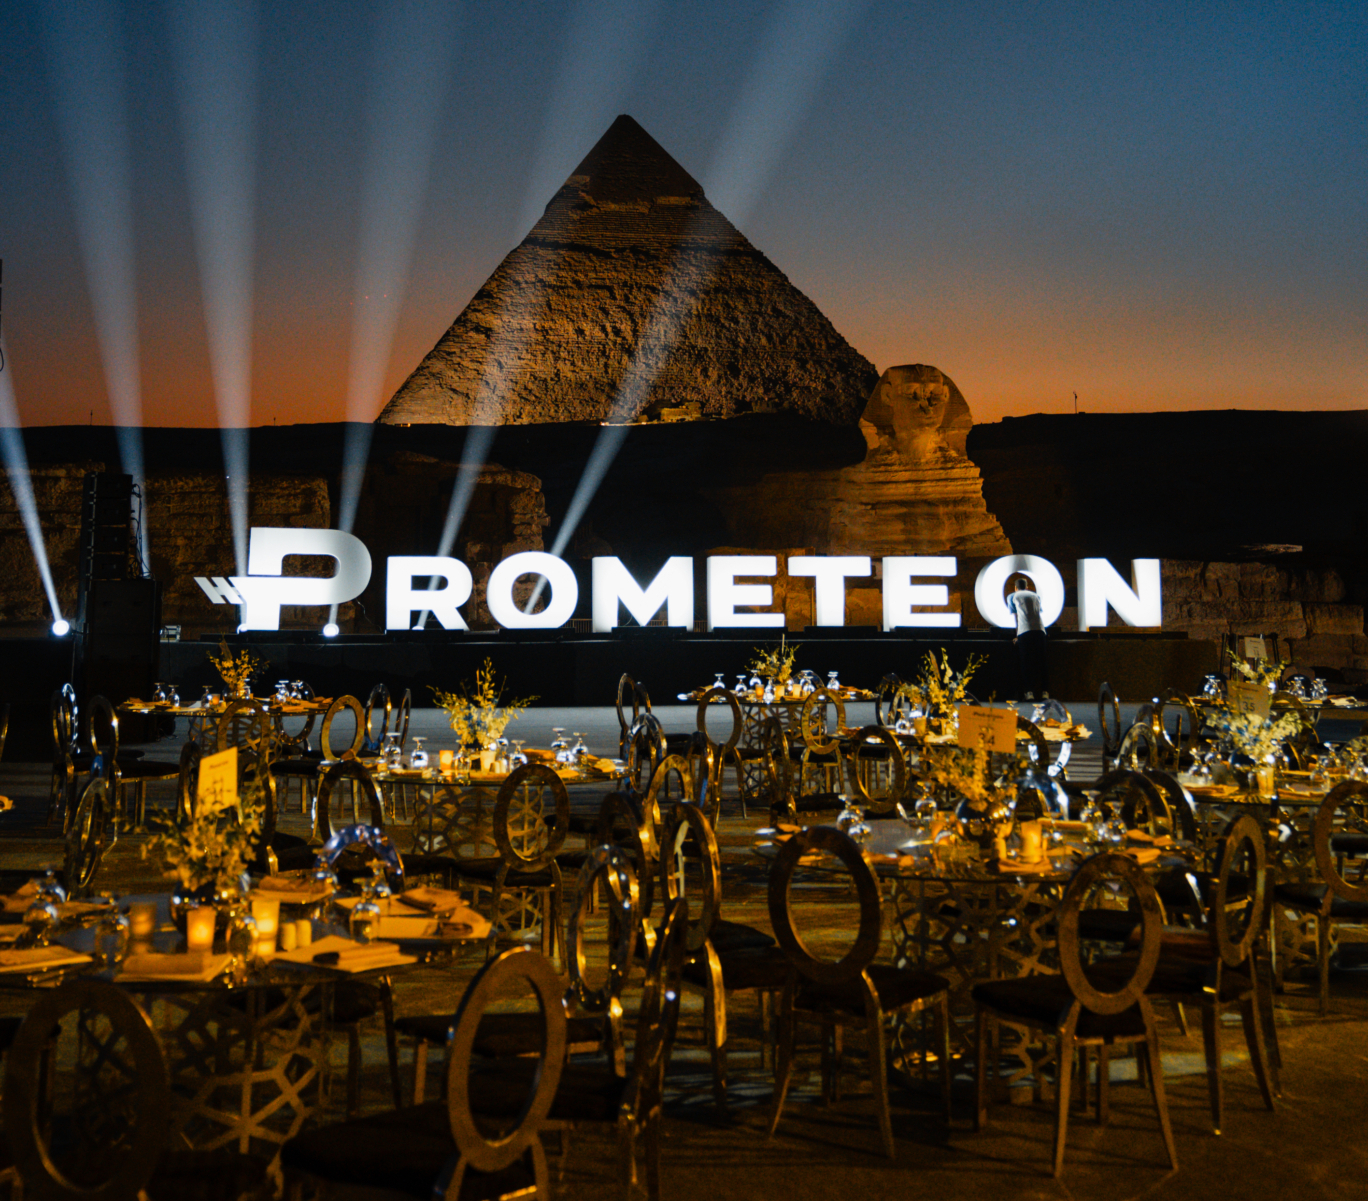 Prometeon-branded tyres launched in Egypt